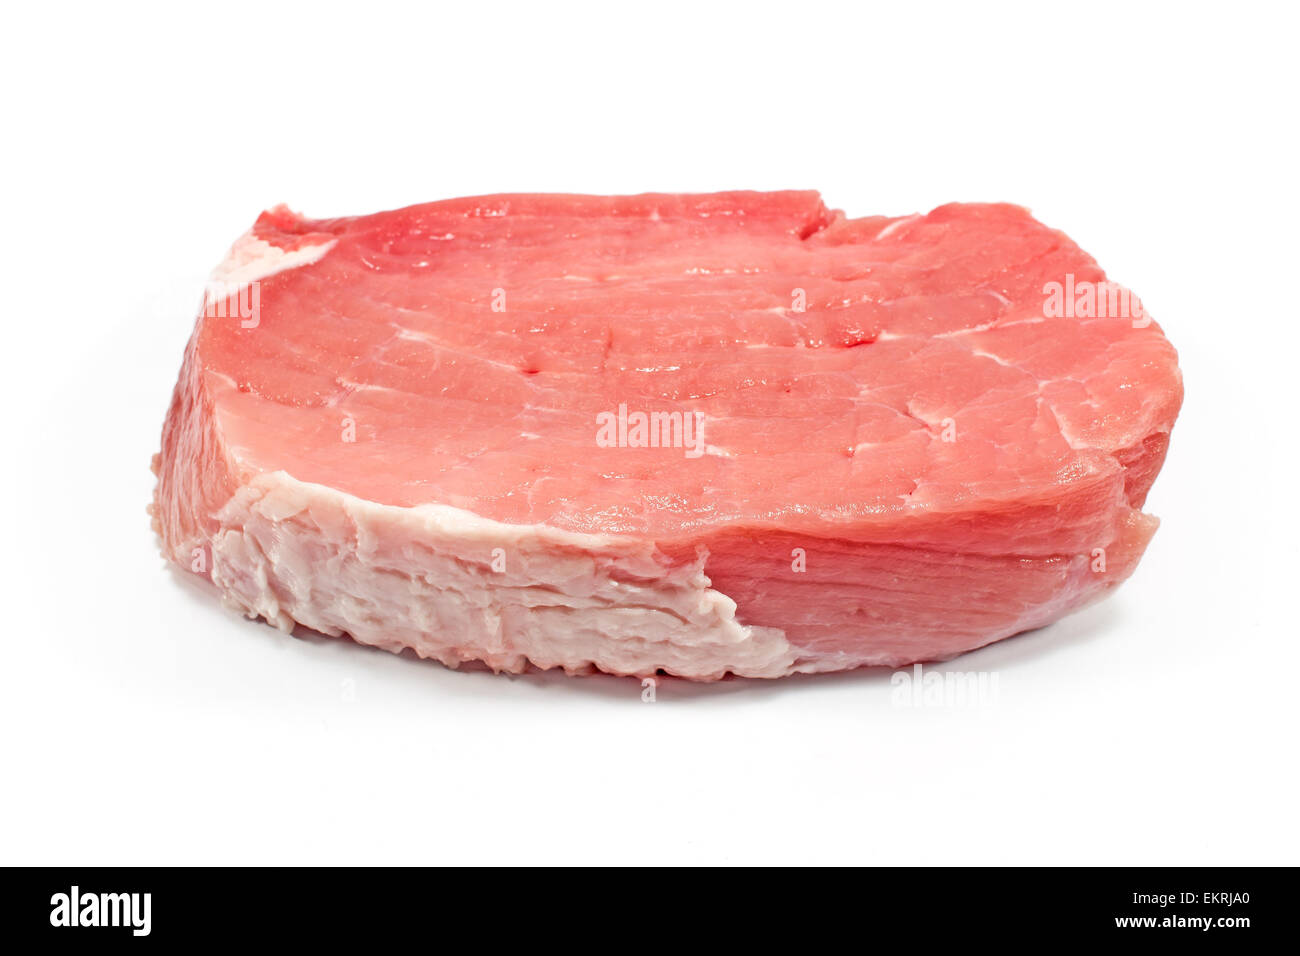 Pork chop meat isolated on white Stock Photo